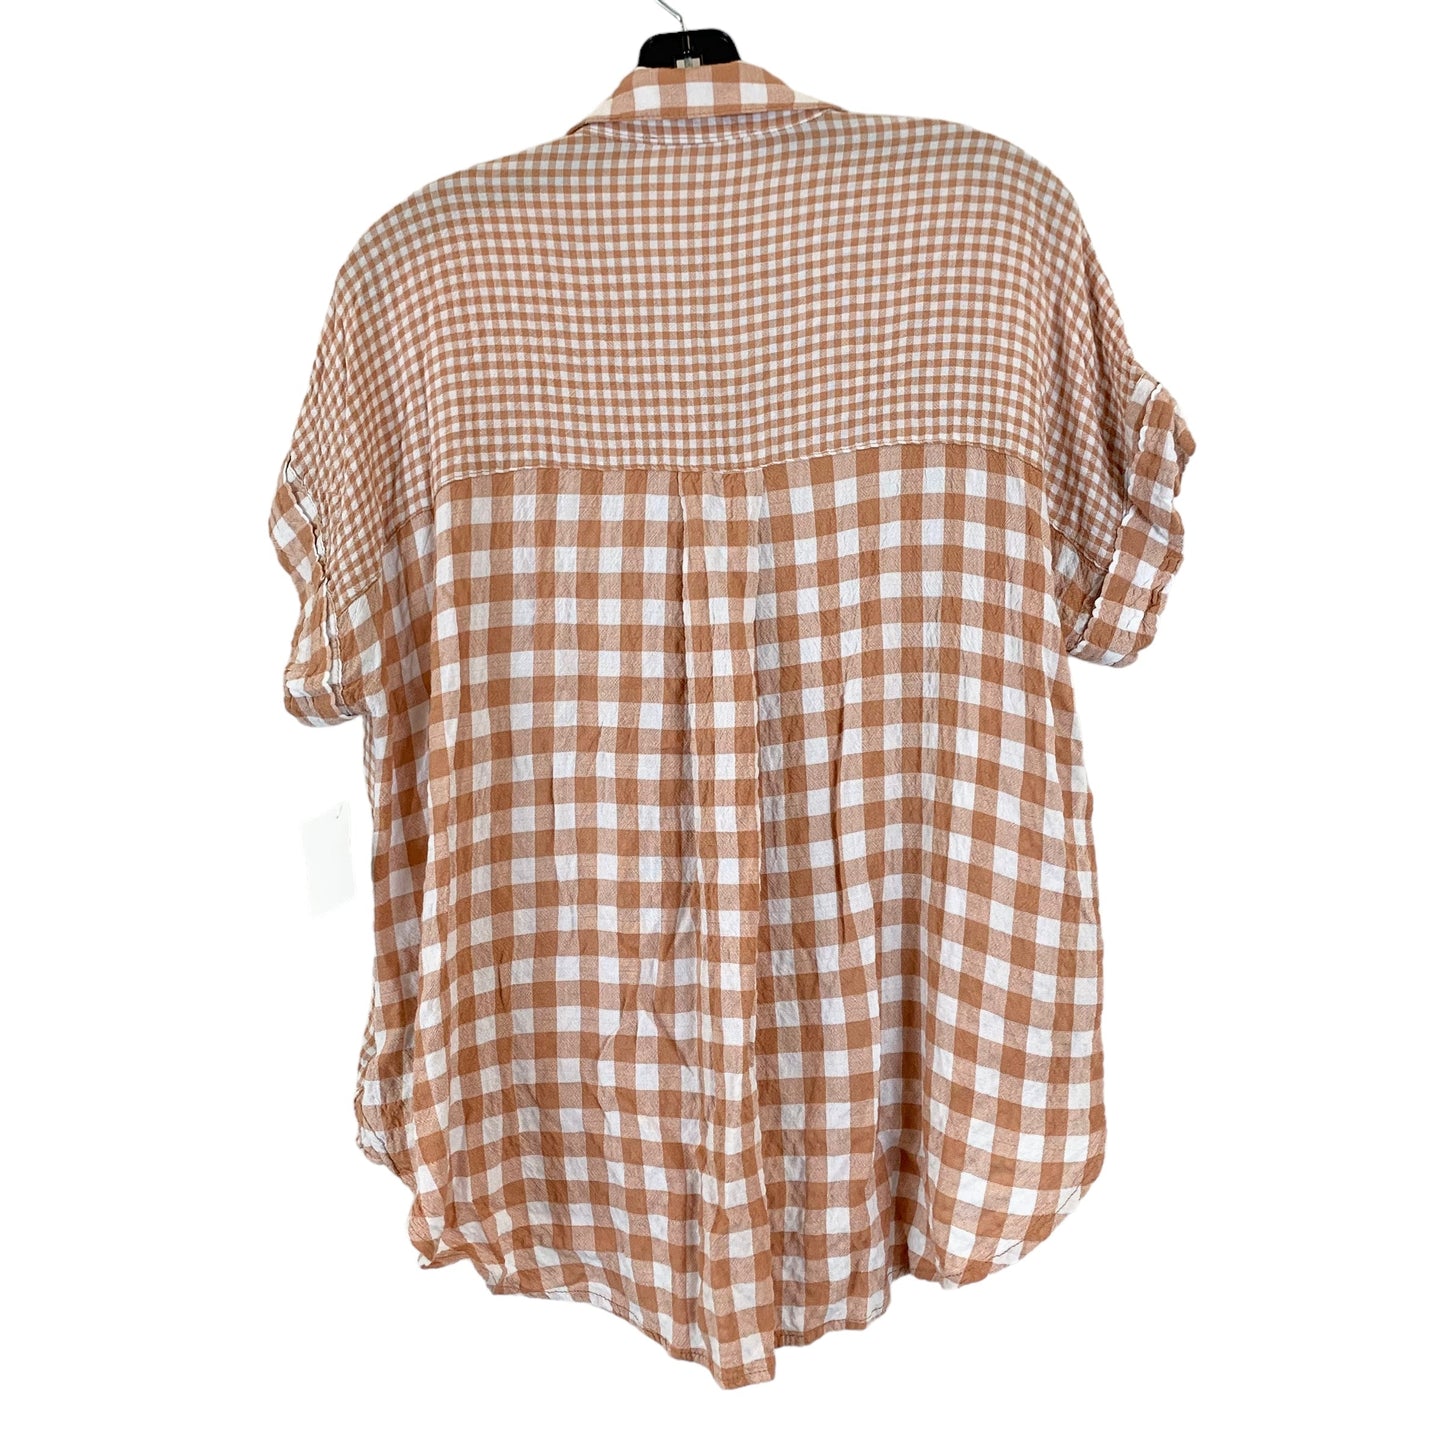 Top Short Sleeve By Jane And Delancey  Size: M